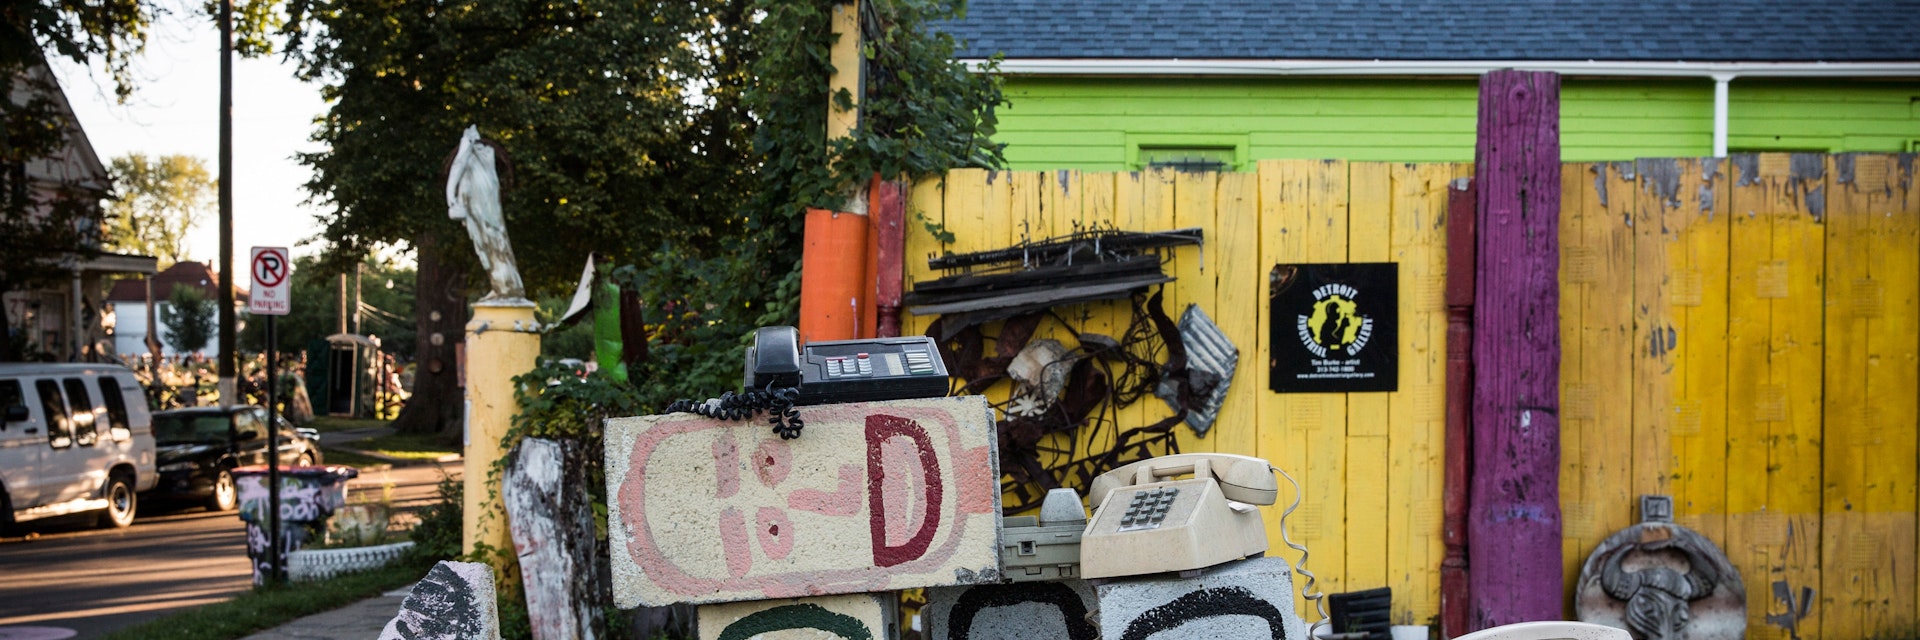 DETROIT, MI - SEPTEMBER 03:  A sculpture created from recycled material sits amongst the "Heidelberg project," which is an "open air art environment" centered around one block in Detroit, on September 3, 2013 in Detroit, Michigan. The Heidelberg project is the brain child of Tyree Guyton. He and other artists use the urban environment (including homes and sidewalks) as a canvas for art, which they make using paint and recycled materials.  (Photo by Andrew Burton/Getty Images)